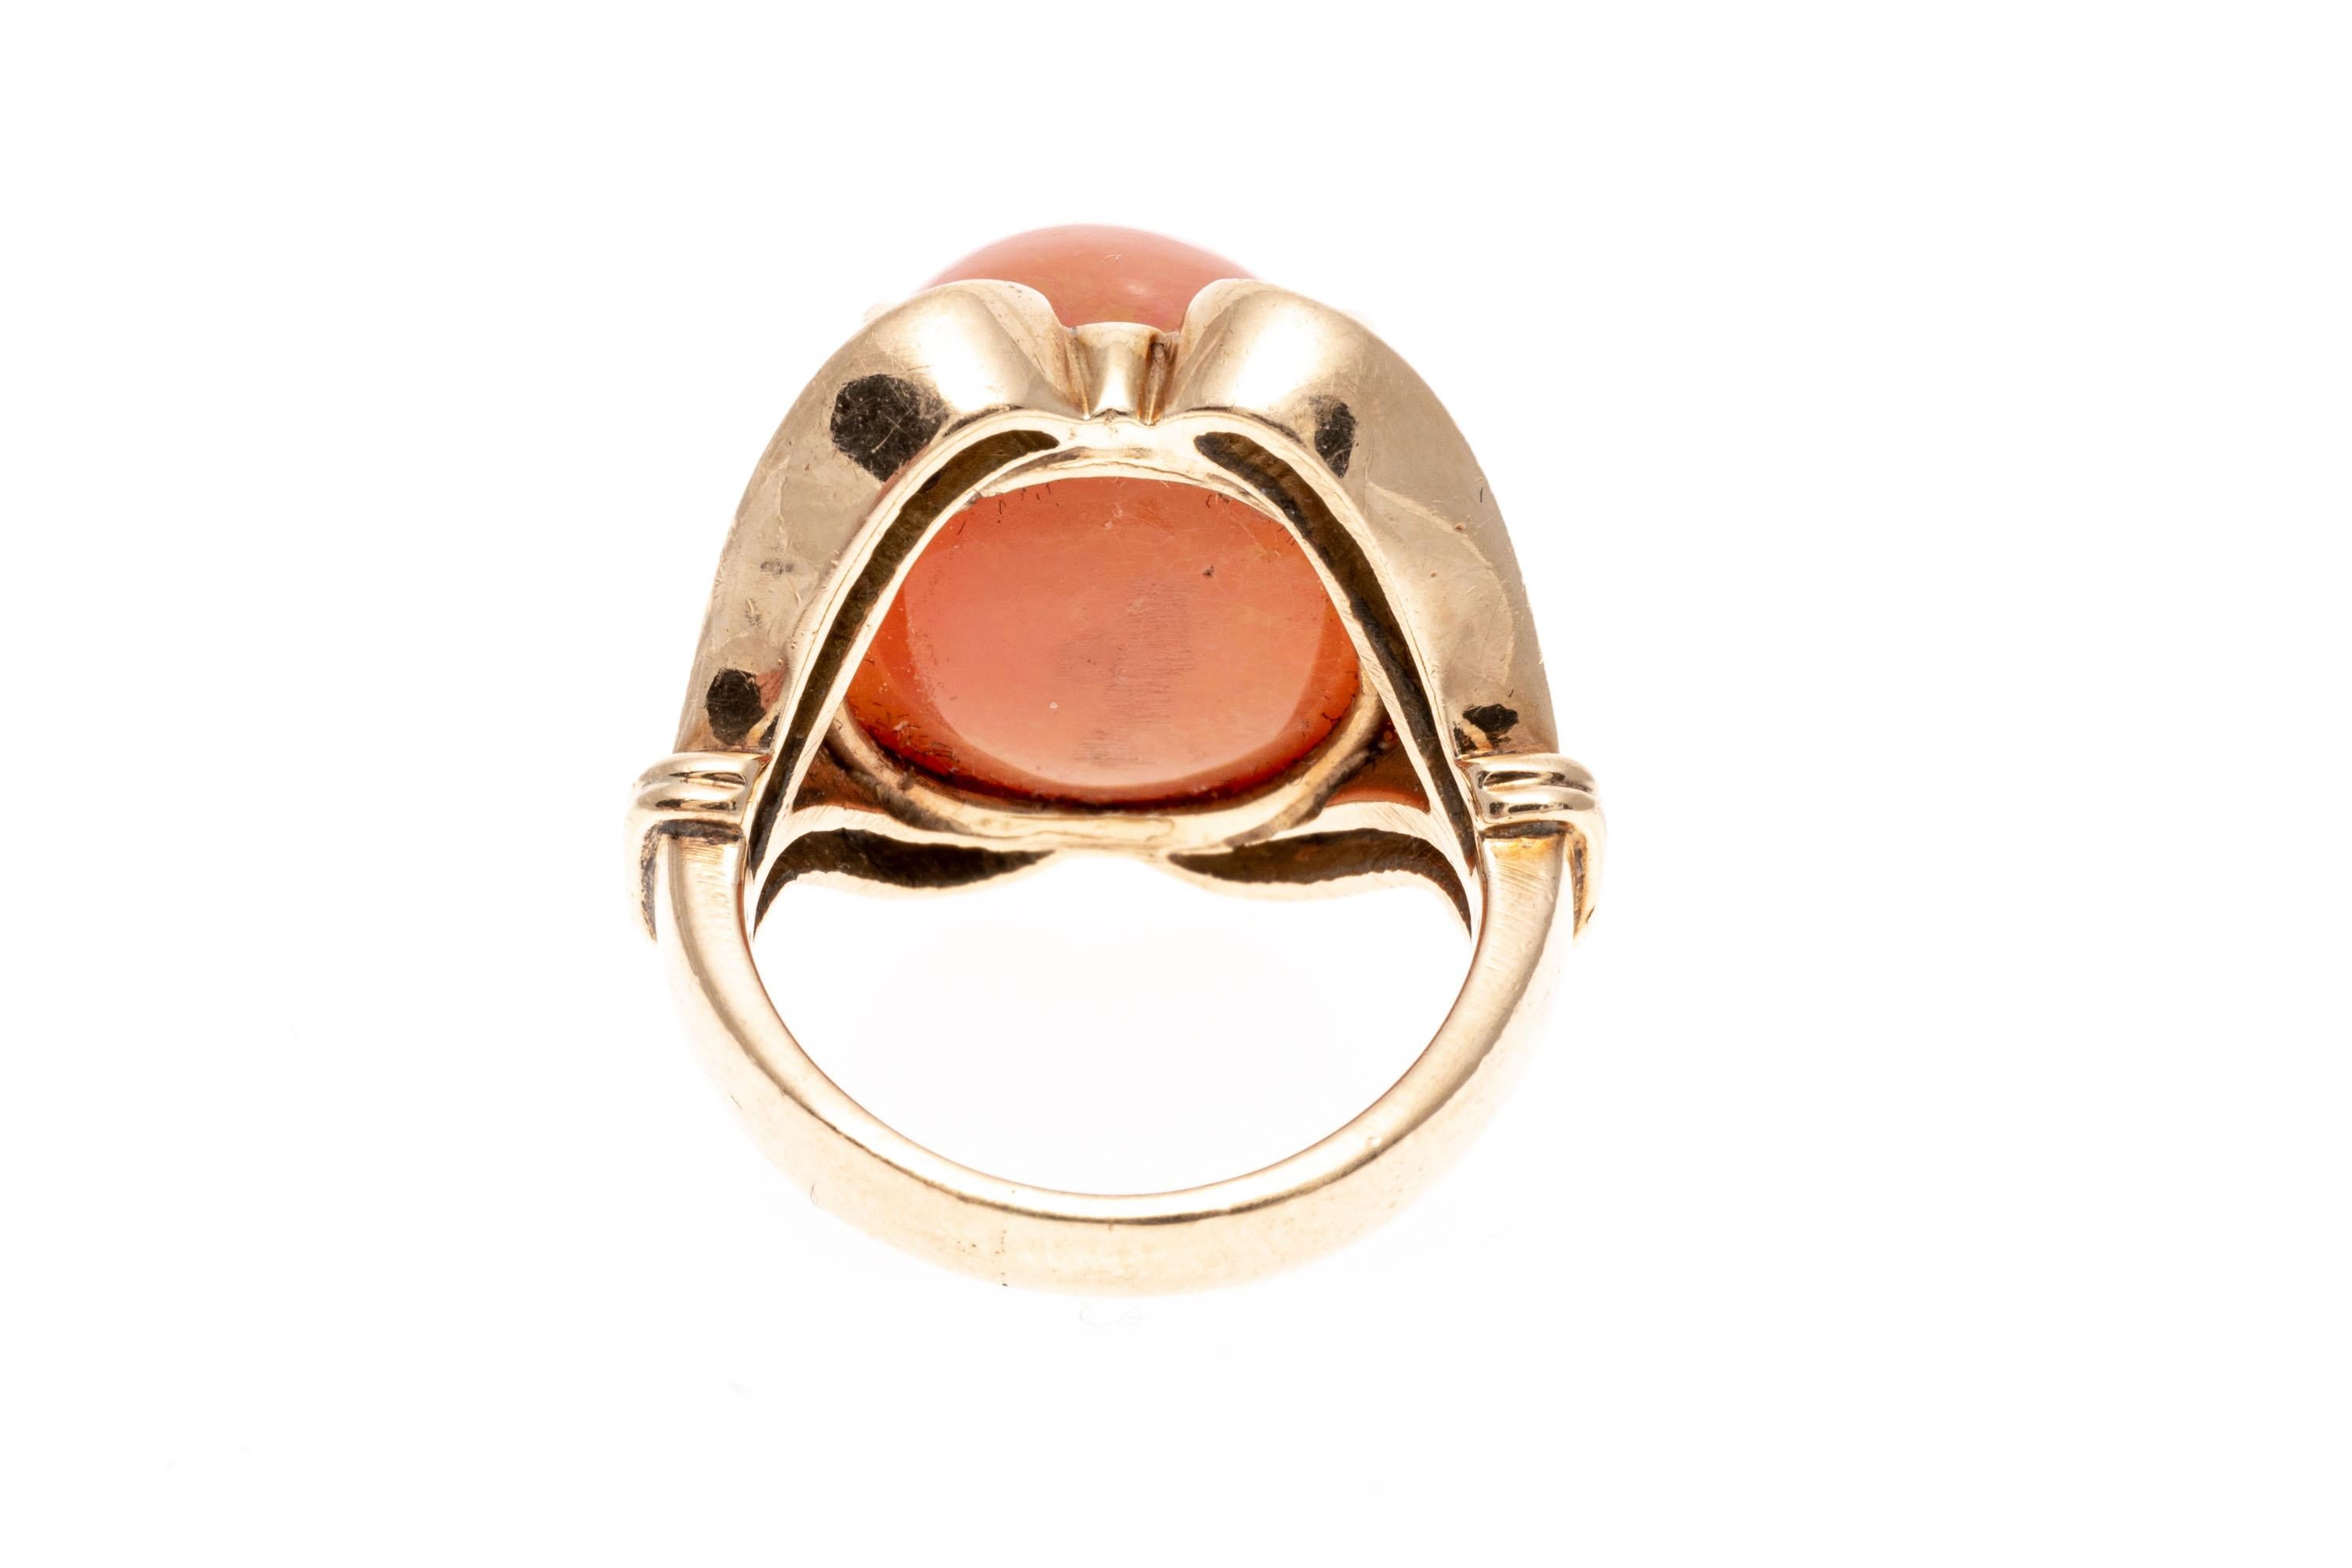 Retro 14k Gold Stunning Orange Fire Opal (App. 10.9 CTS) And Diamond Ring For Sale